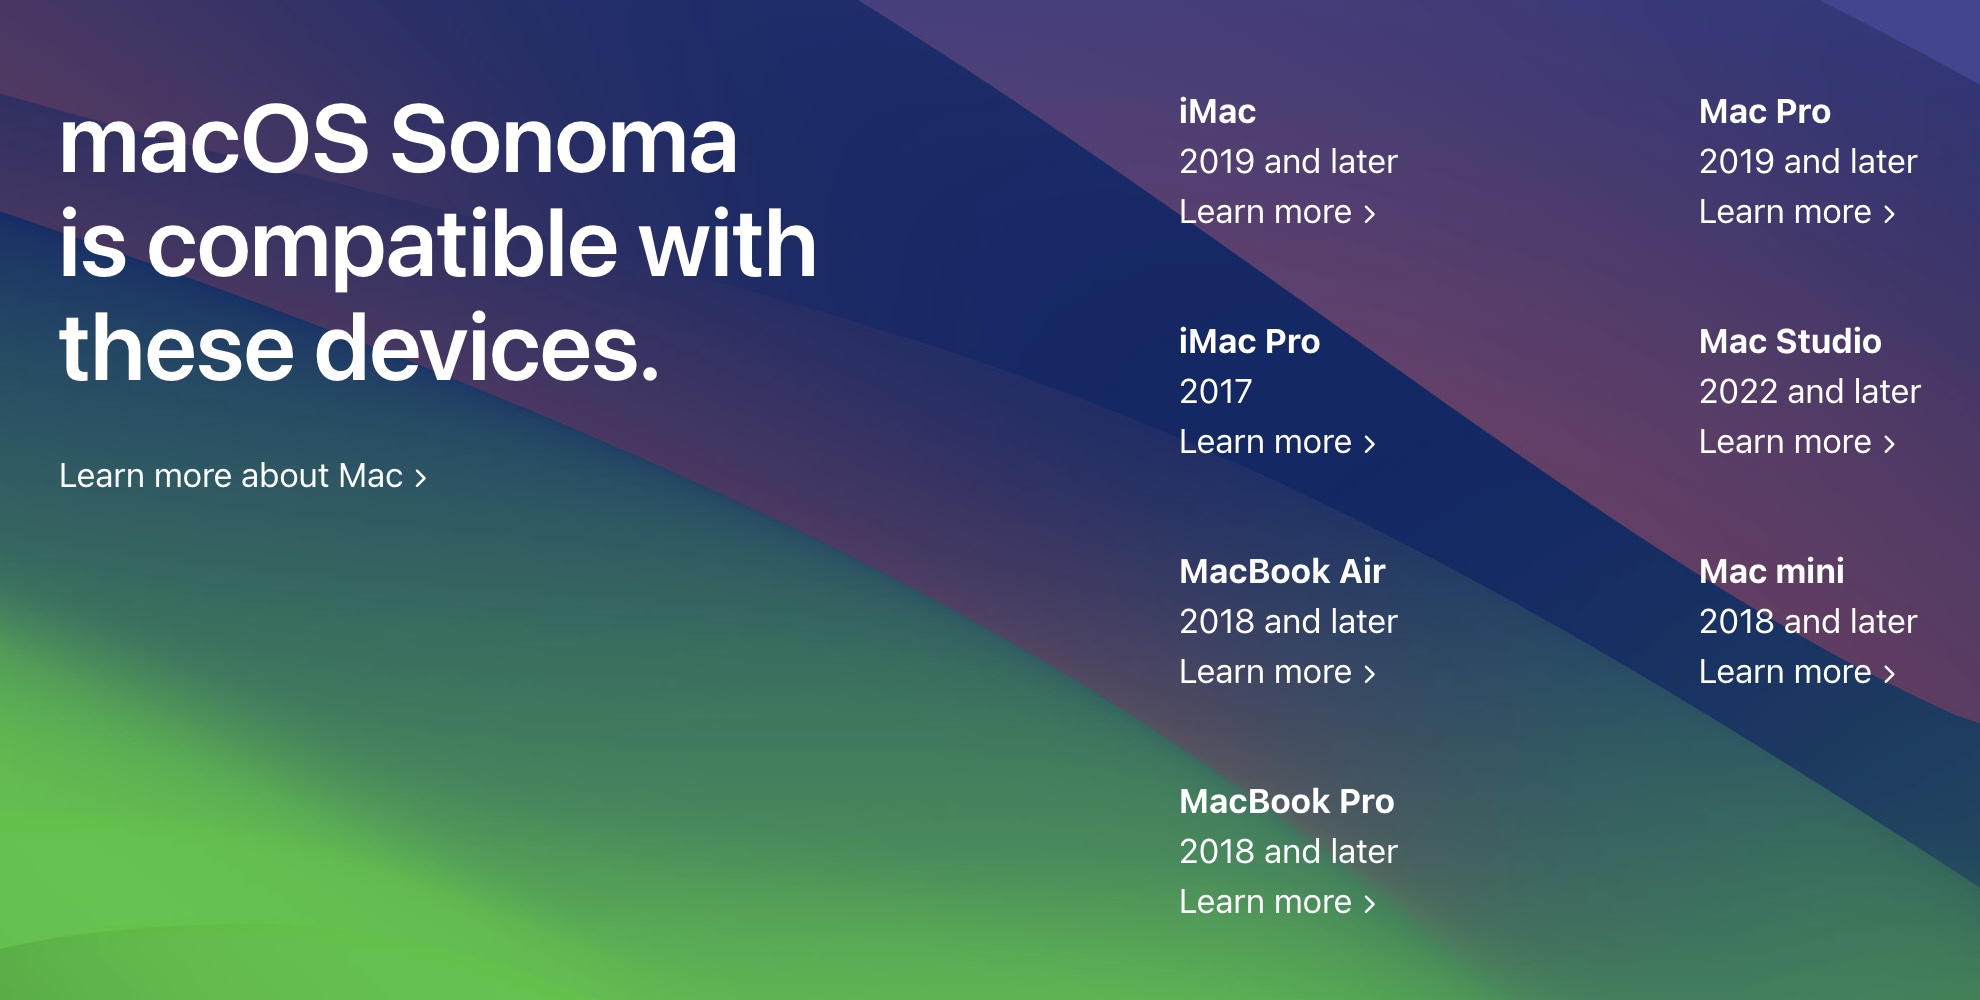 The full macOS Sonoma support list.